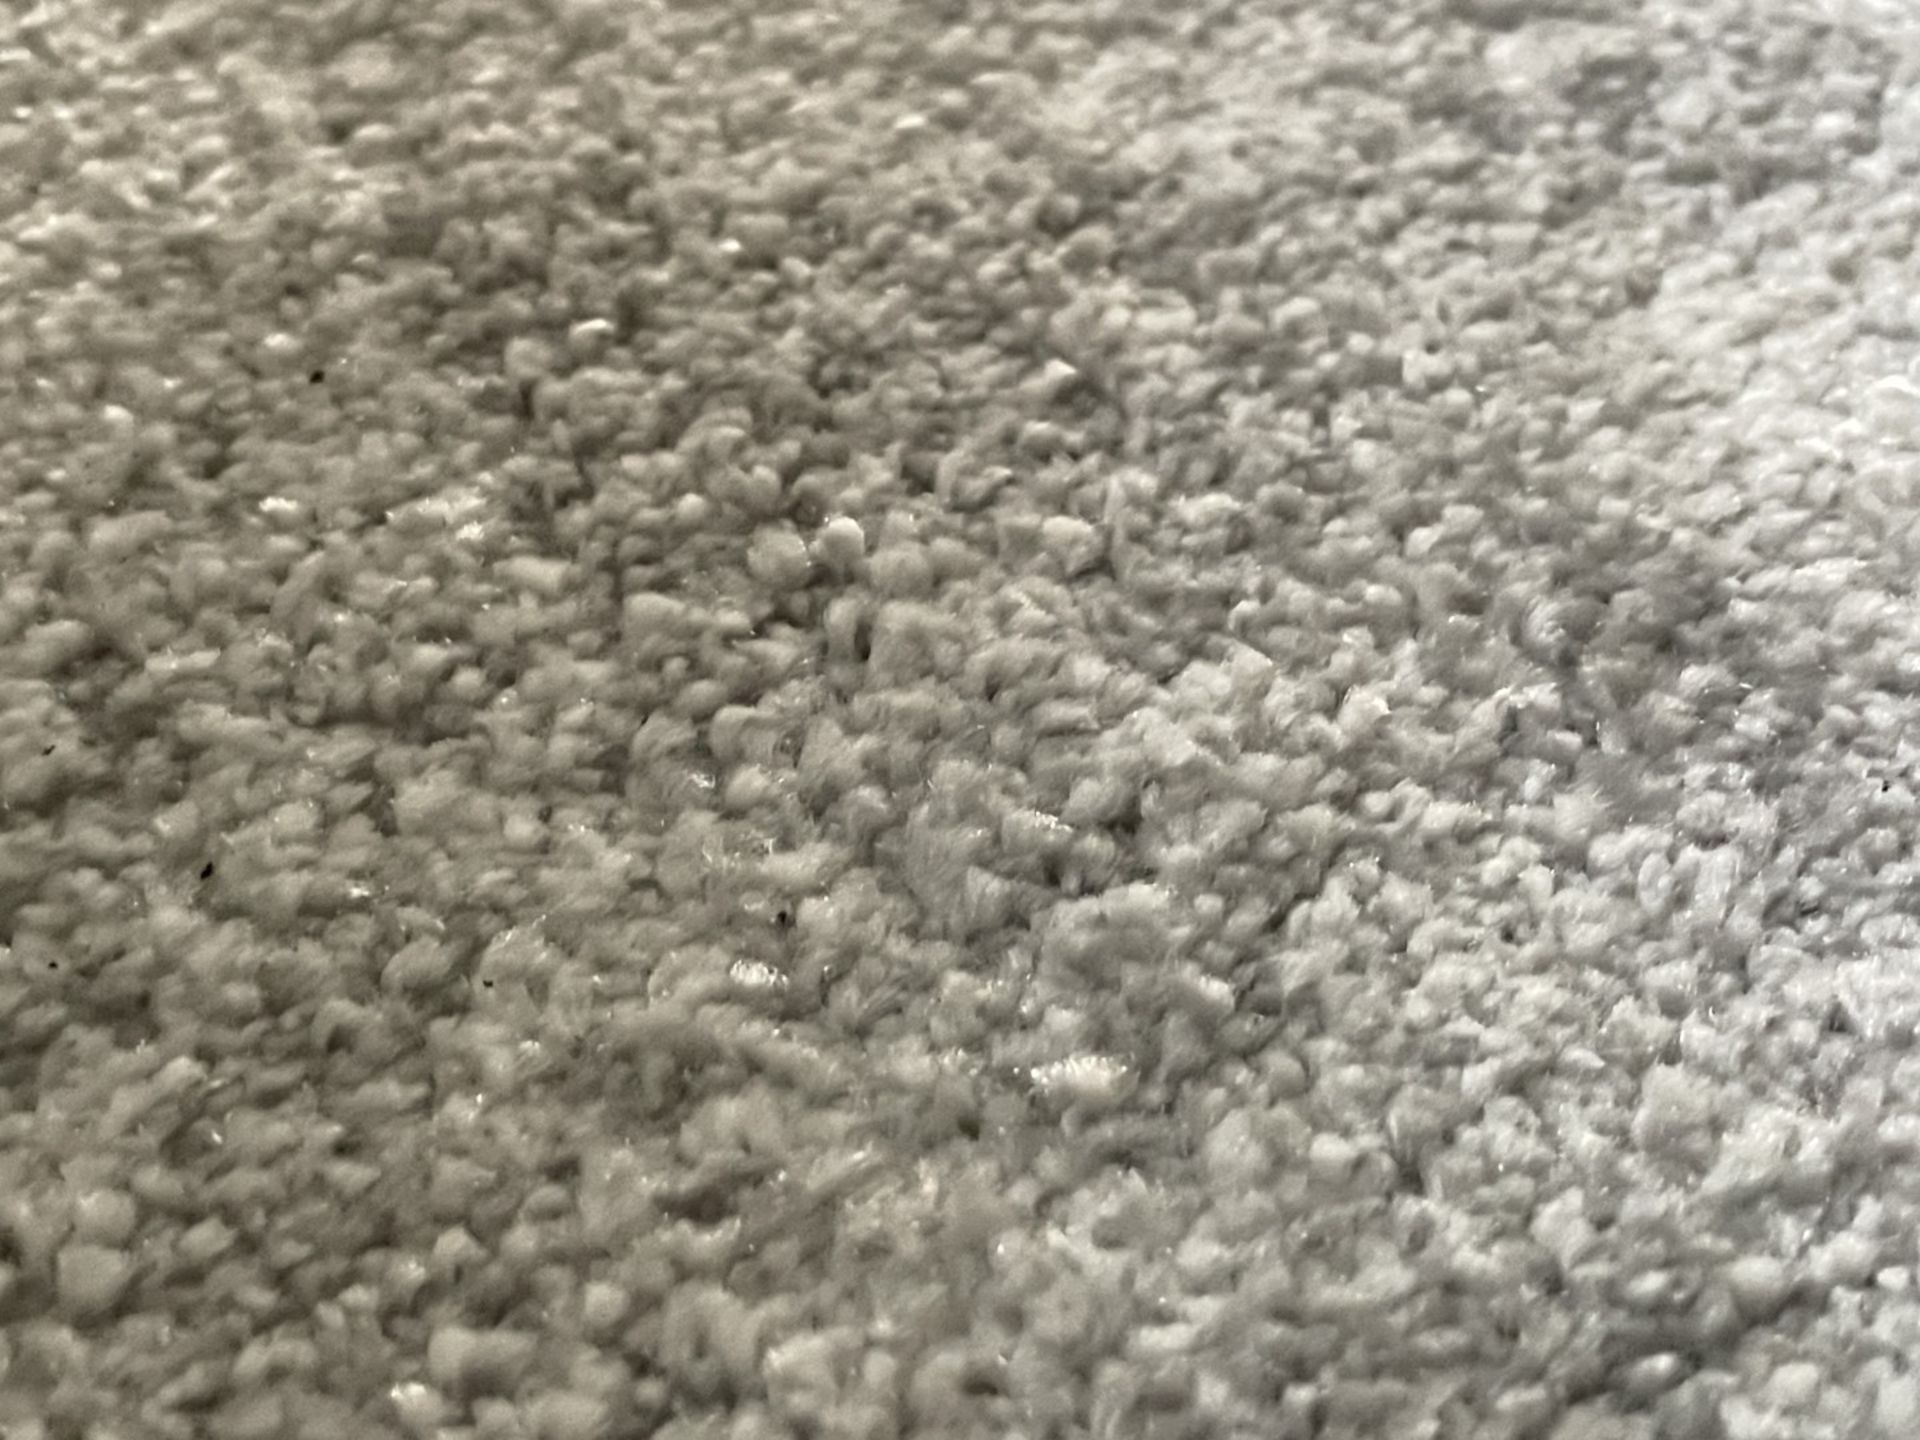 1 x Luxury Wool Downstairs Carpet in a Neutral Tone + Premium Underlay - Ref: PAN211 - CL896 - NO - Image 9 of 20